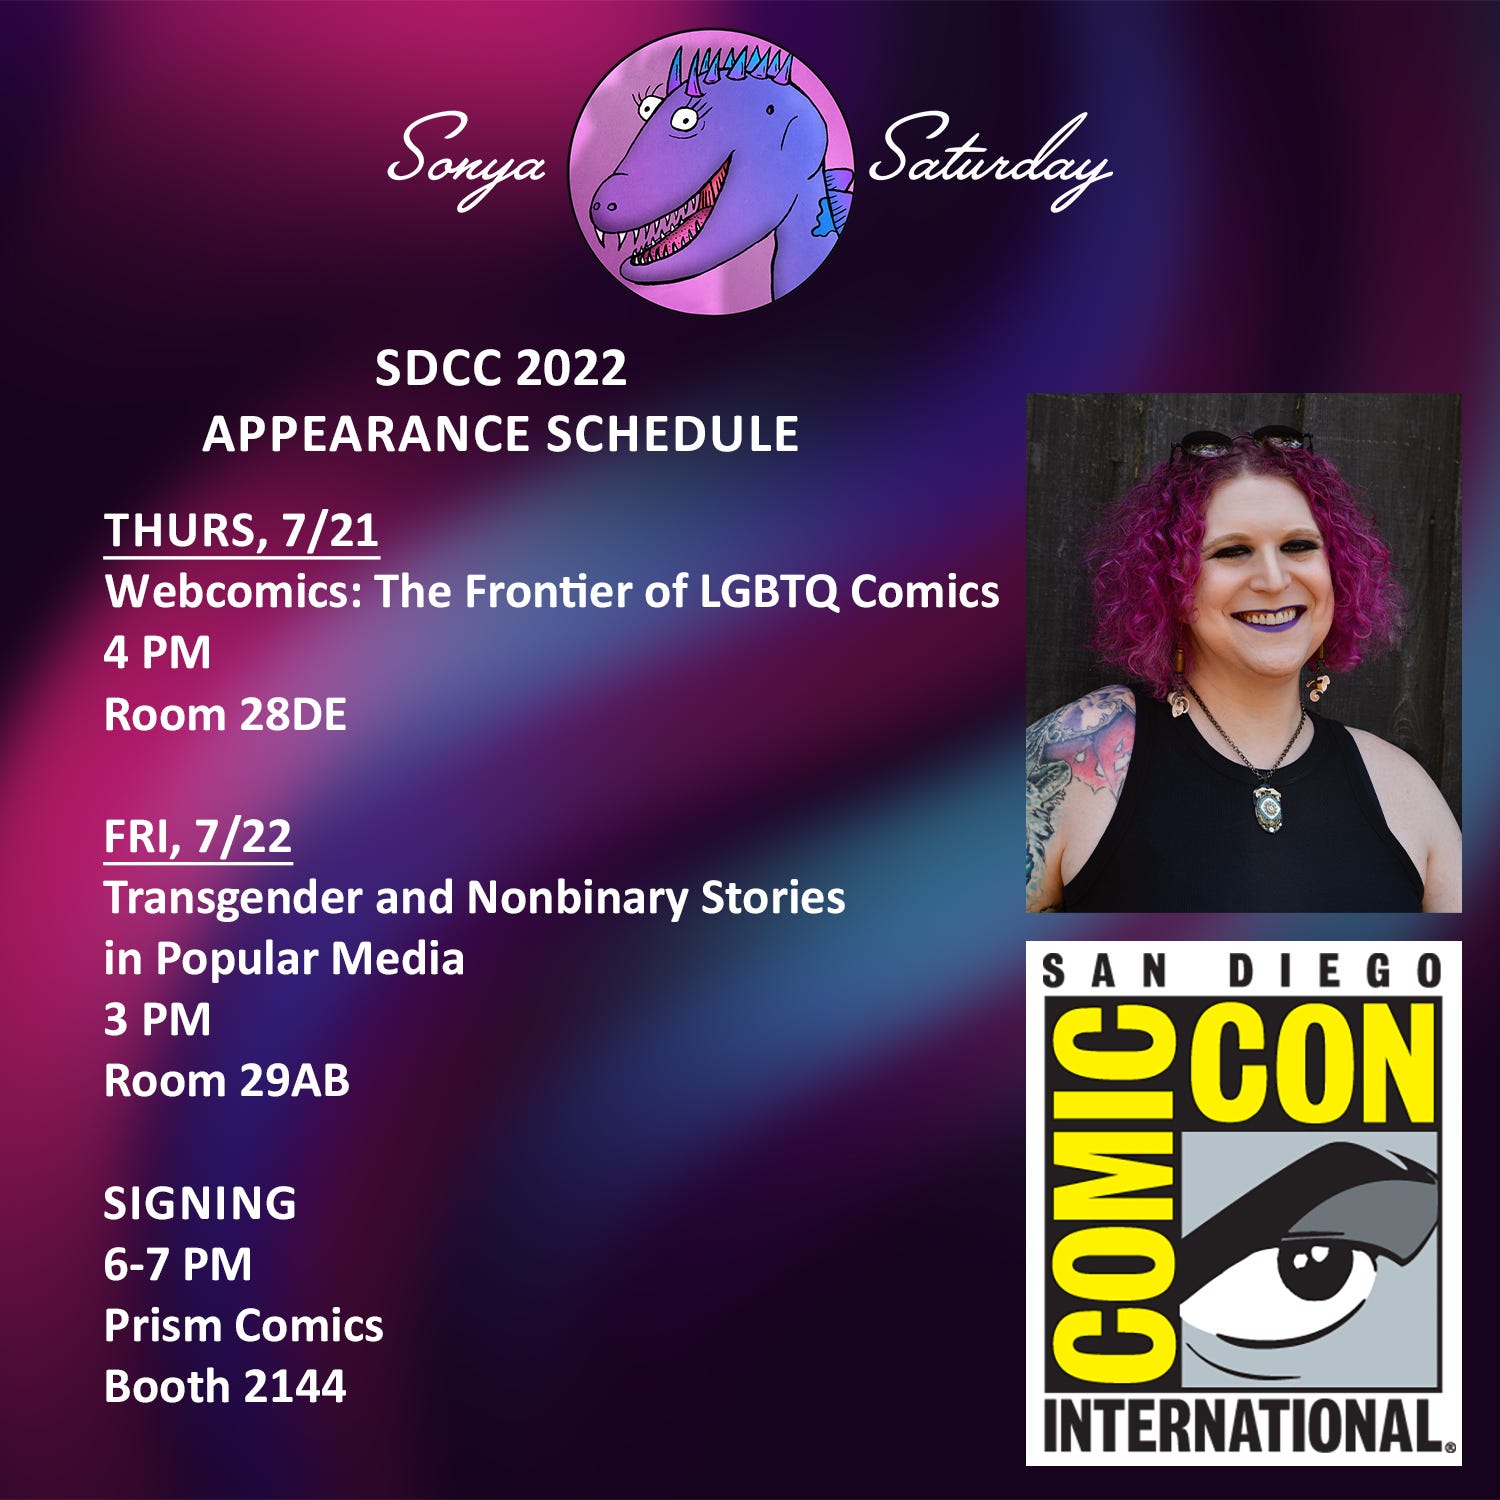 SDCC 2022 Appearance Schedule by Sonya Saturday